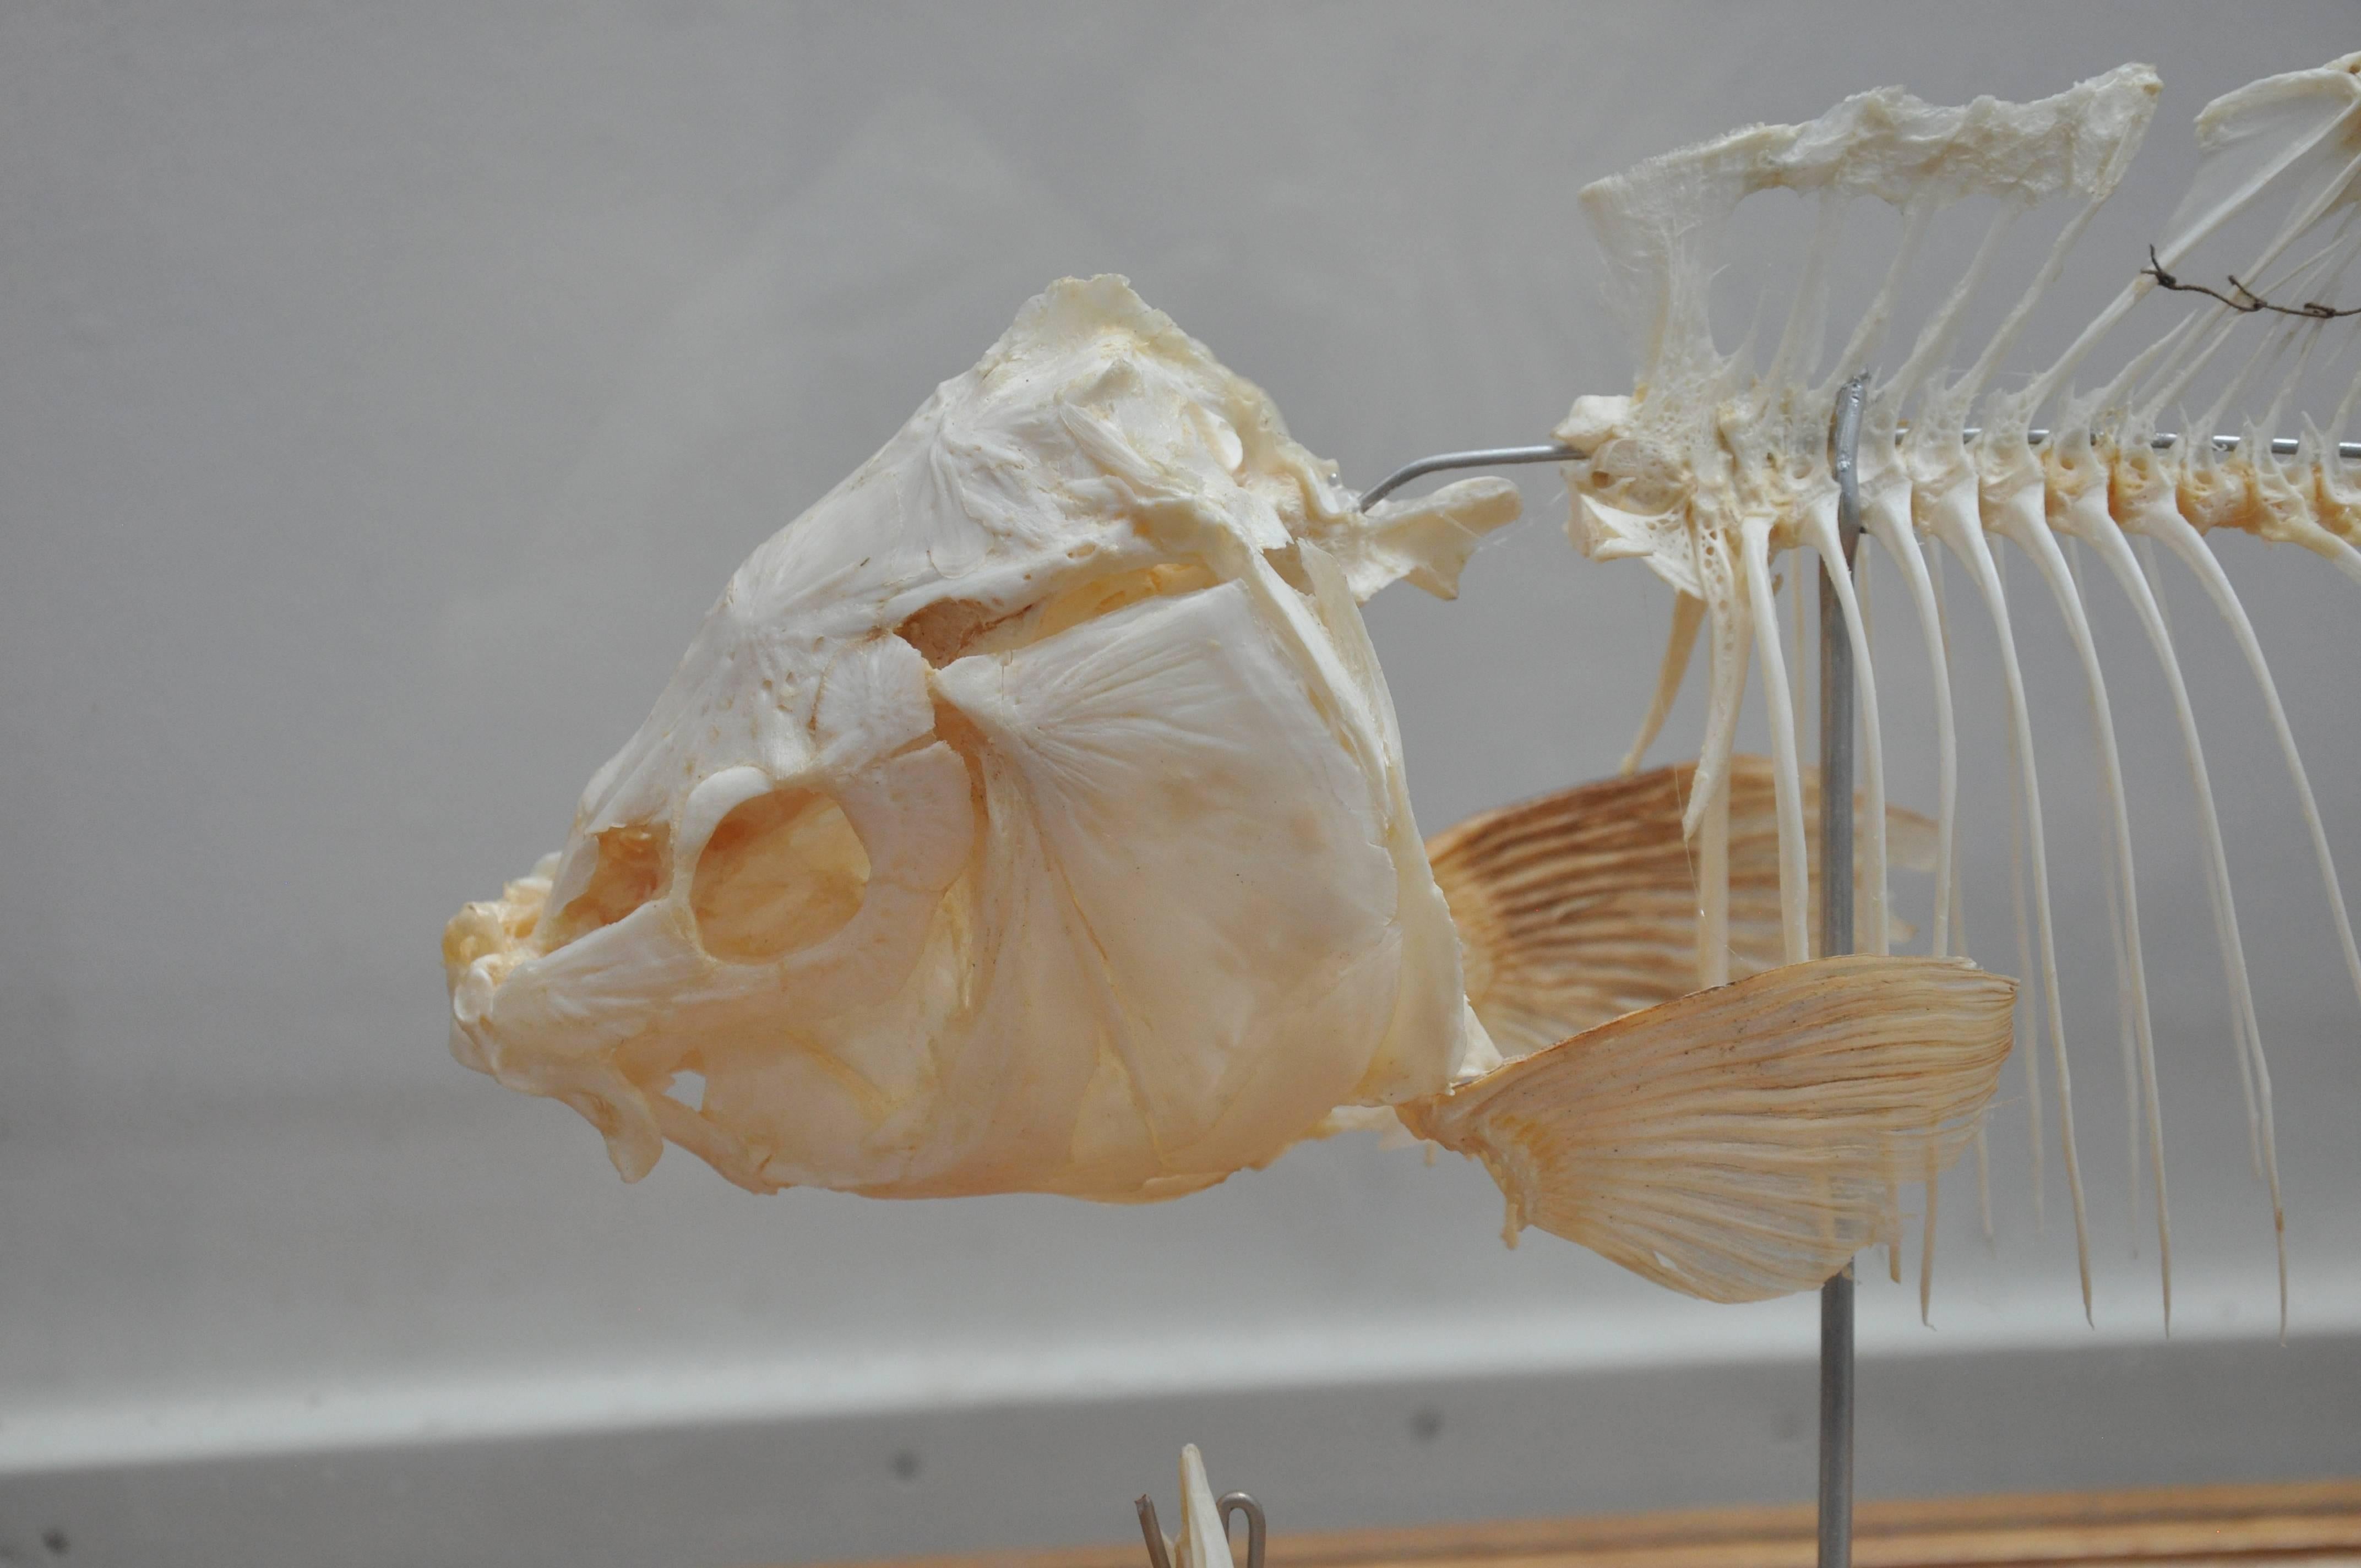 Early 20th century antique fish skeleton in glass display case found in Germany.

Dimensions: 22.5